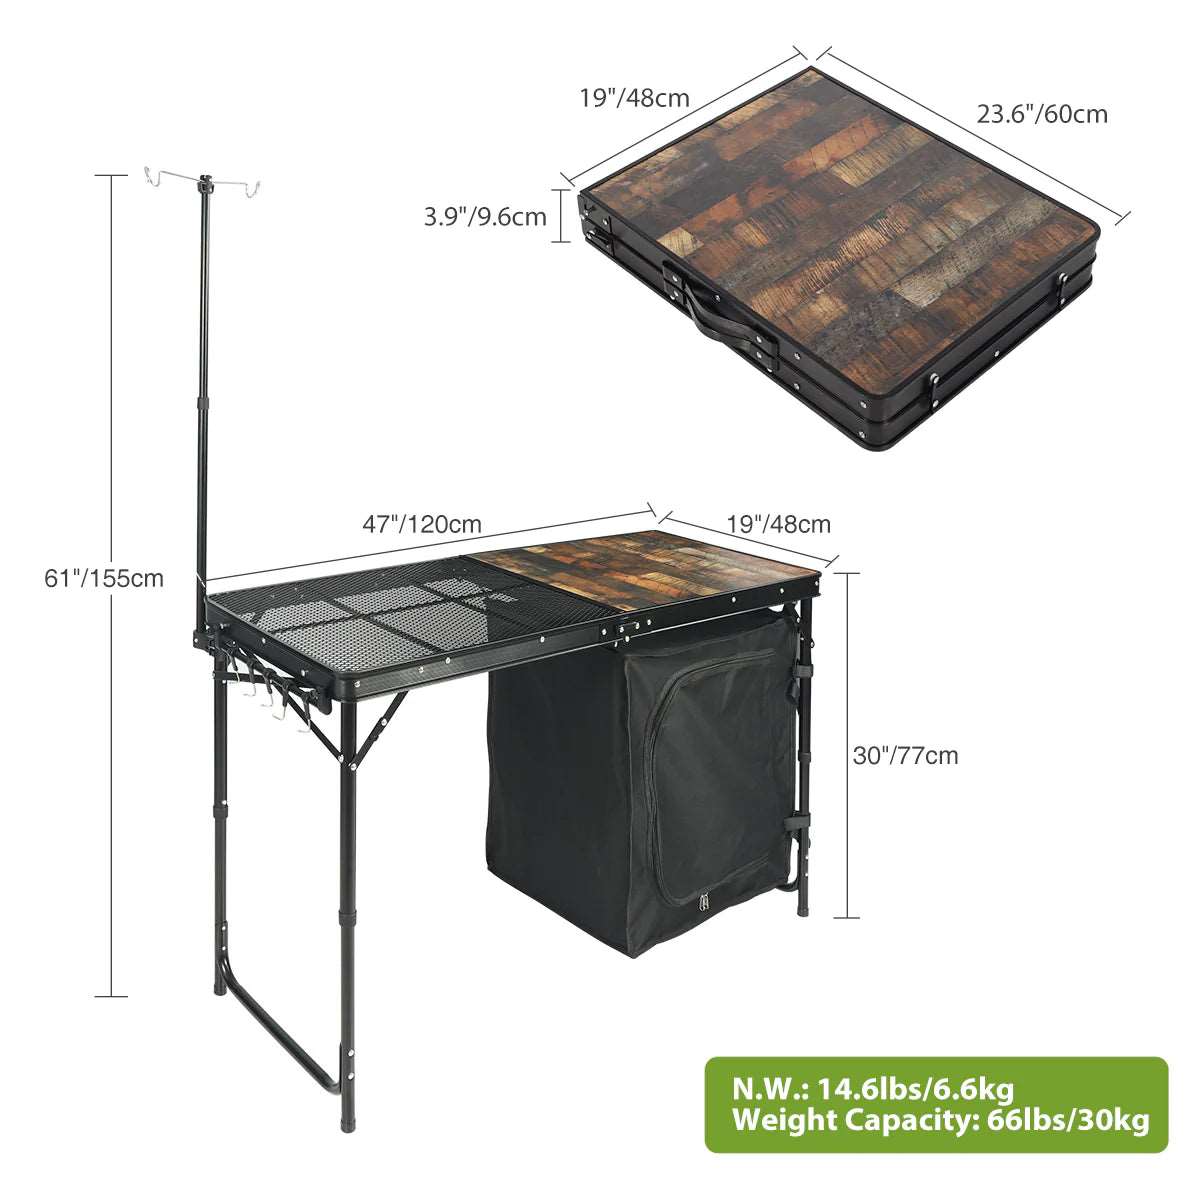 Portable Camping Kitchen Table with Storage Organizer and Hooks